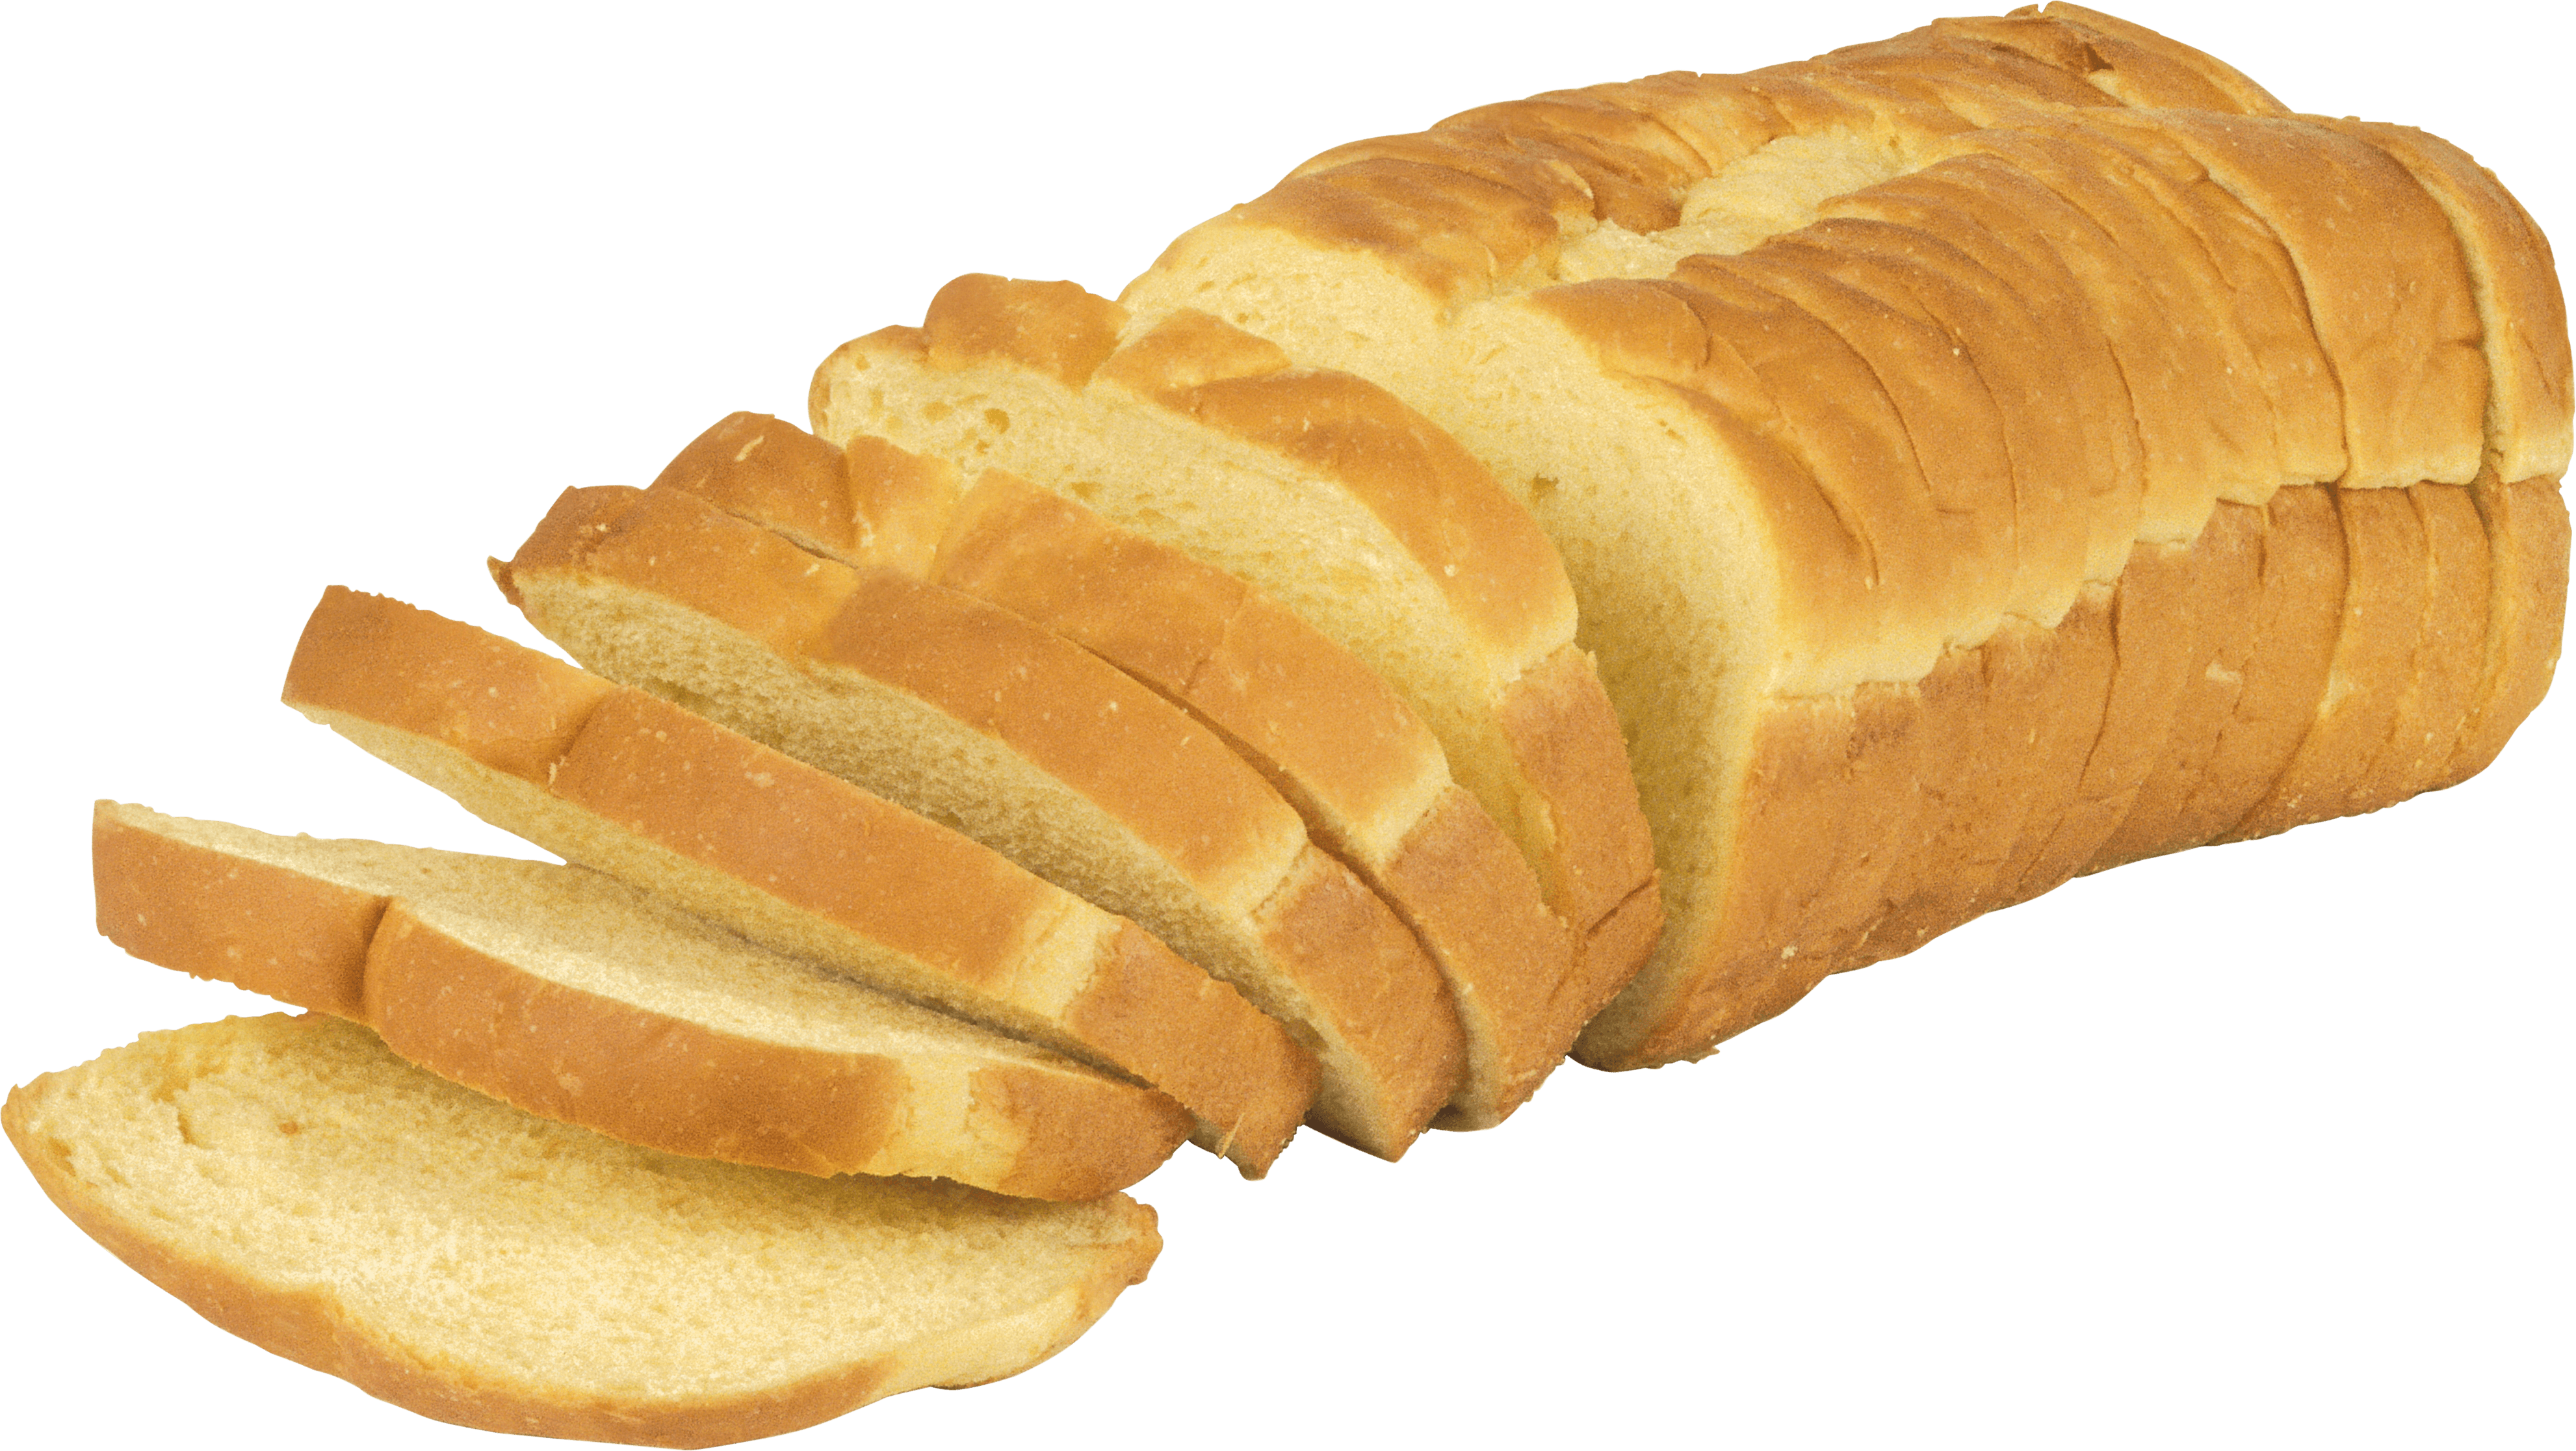 Sliced Bread Bread With No Background